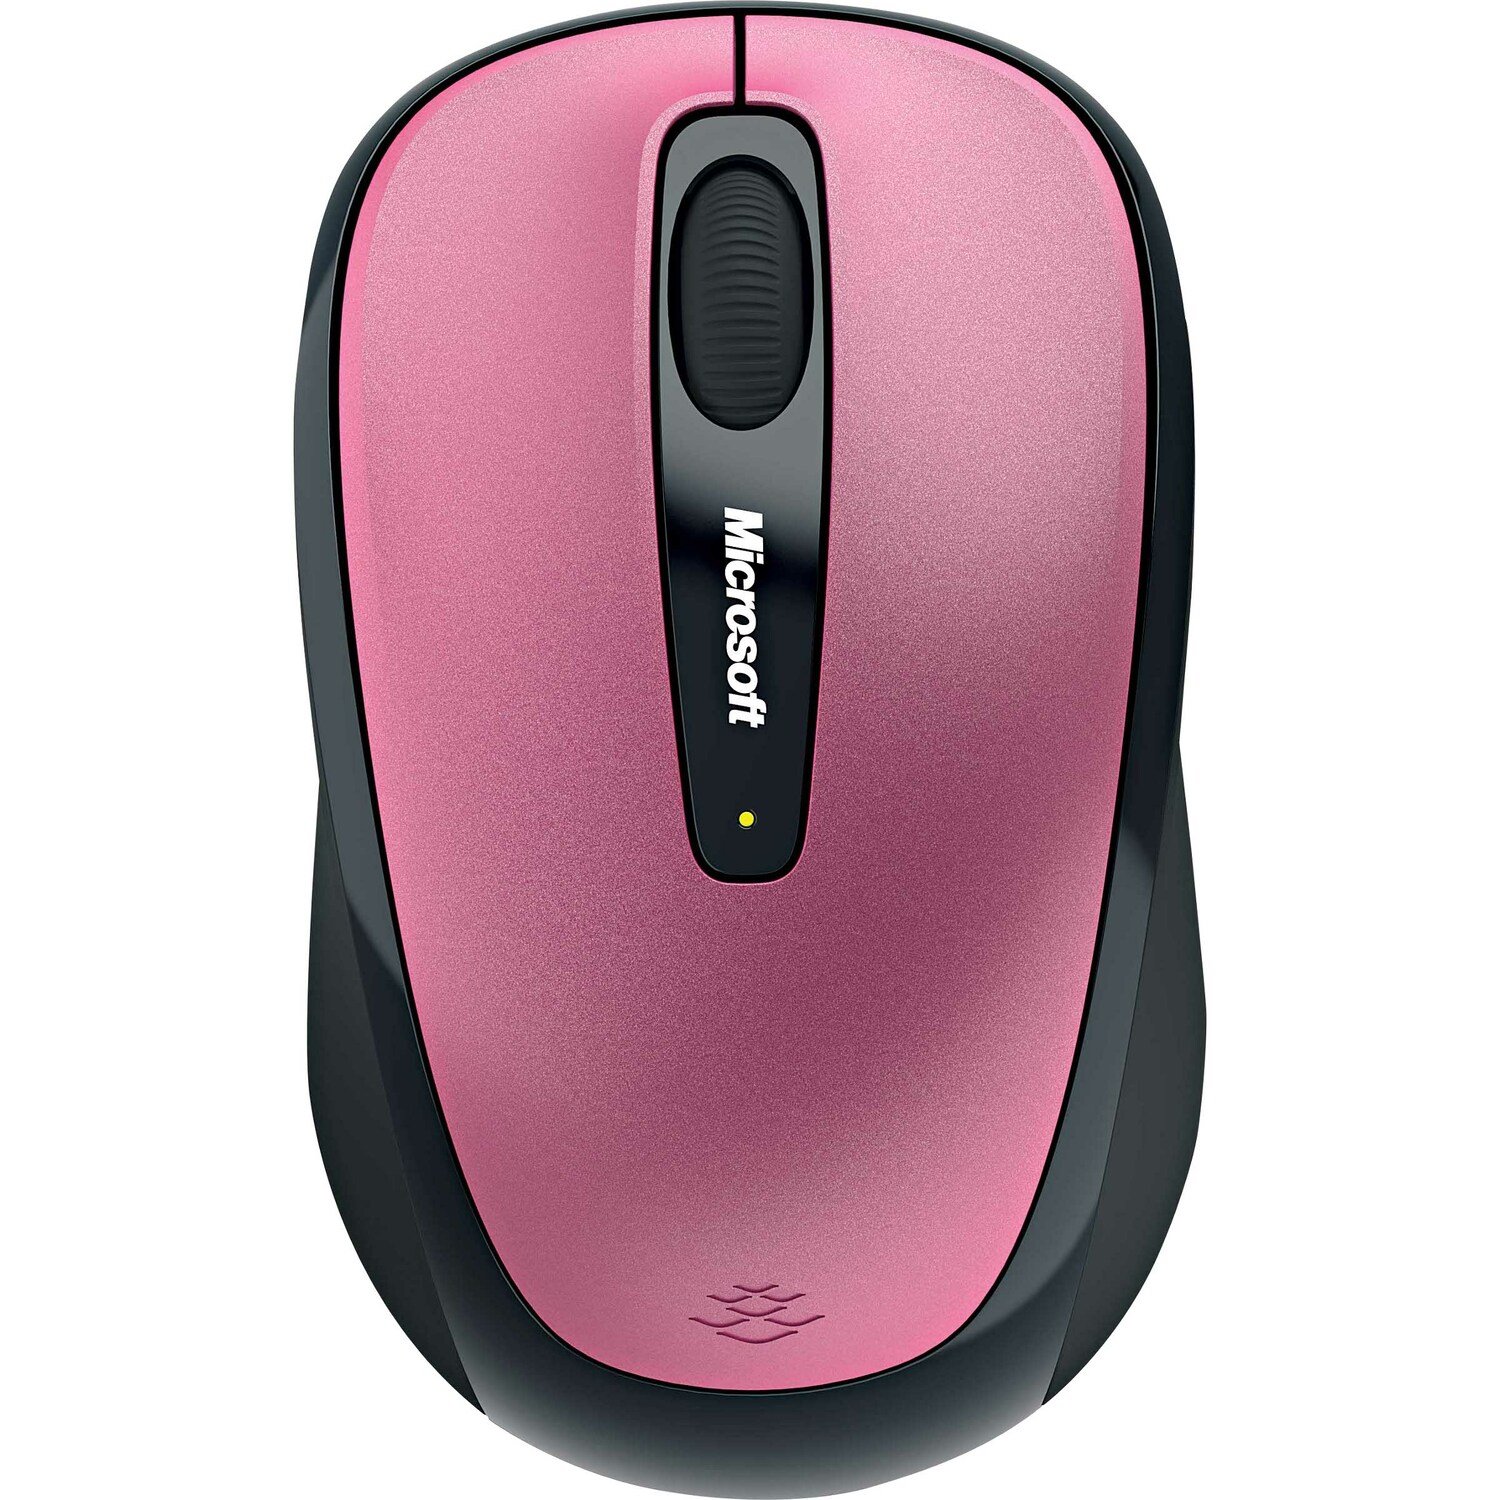 Microsoft Wireless Mobile 3500 Mouse - Radio Frequency - USB 2.0 - BlueTrack - 3 Button(s) - Pink